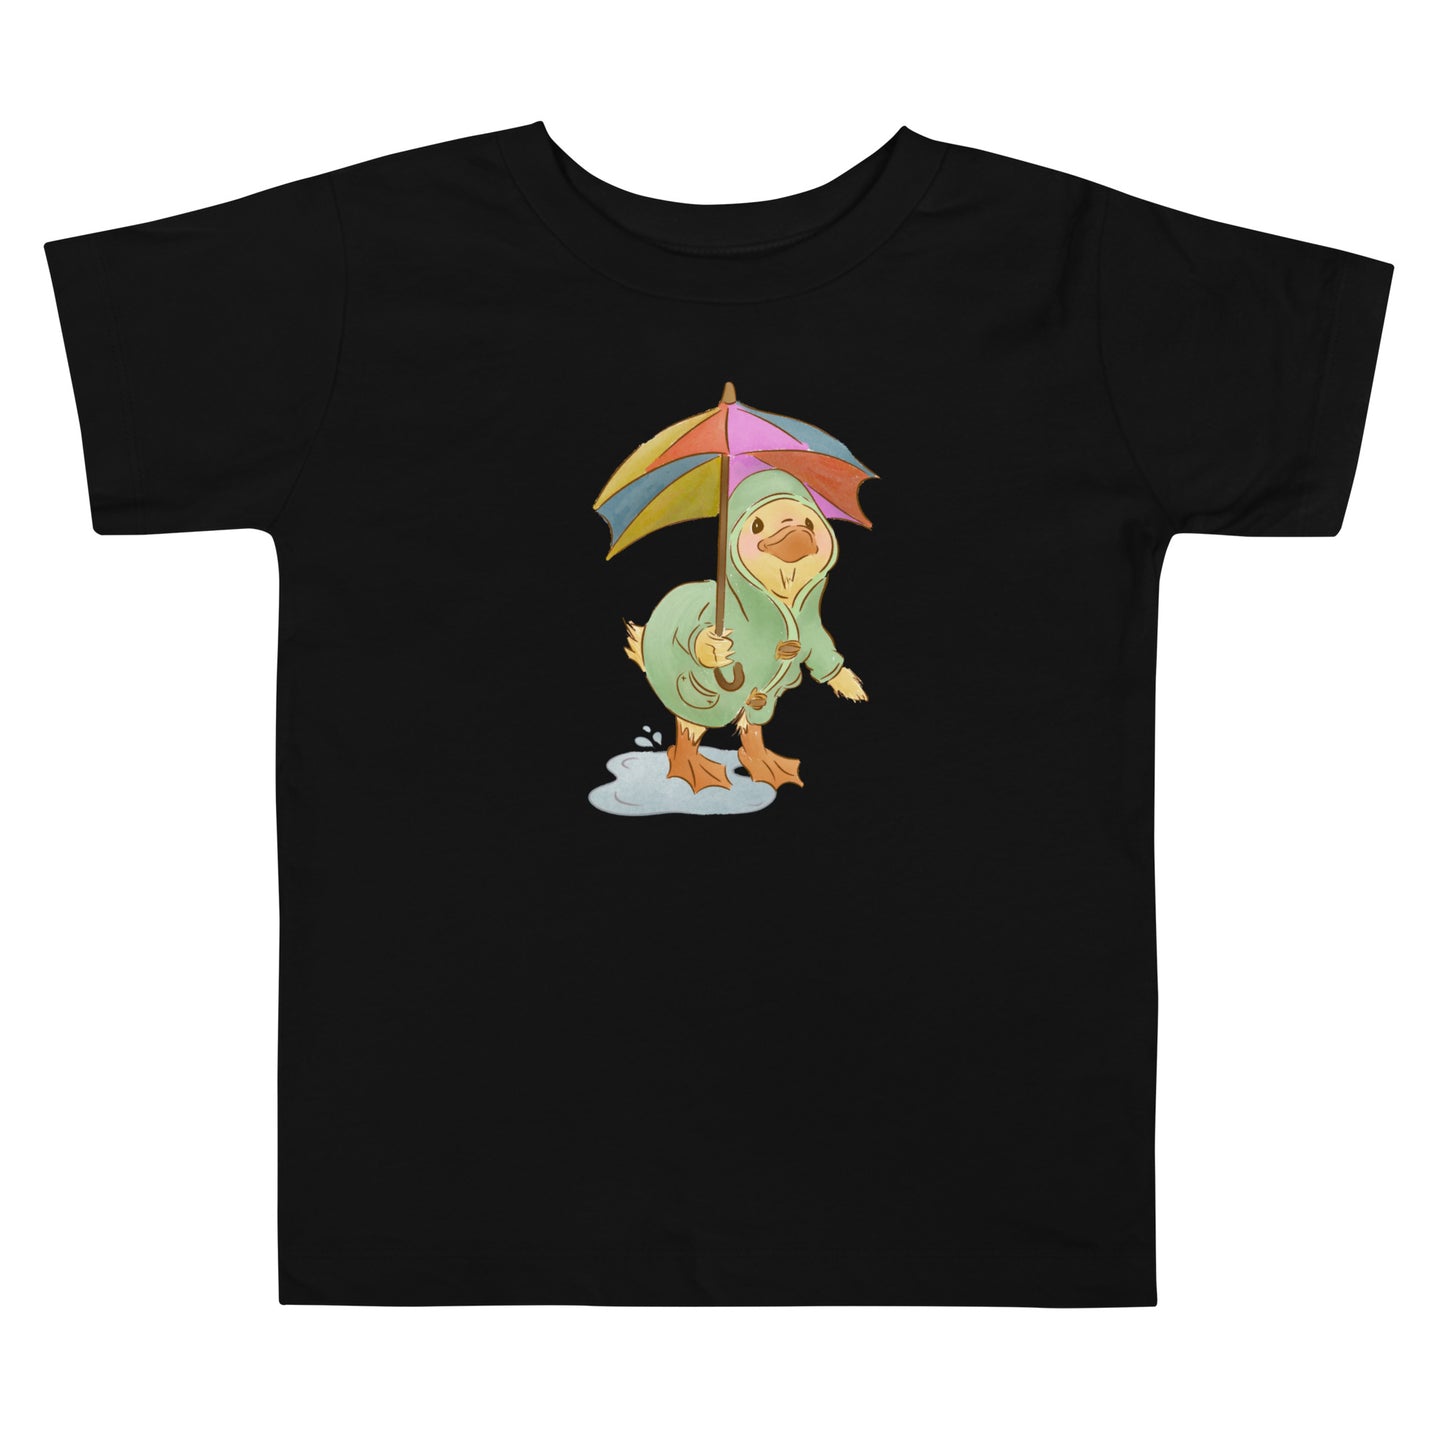 Mr Puddle Duck : Rainbow : Toddler Tee